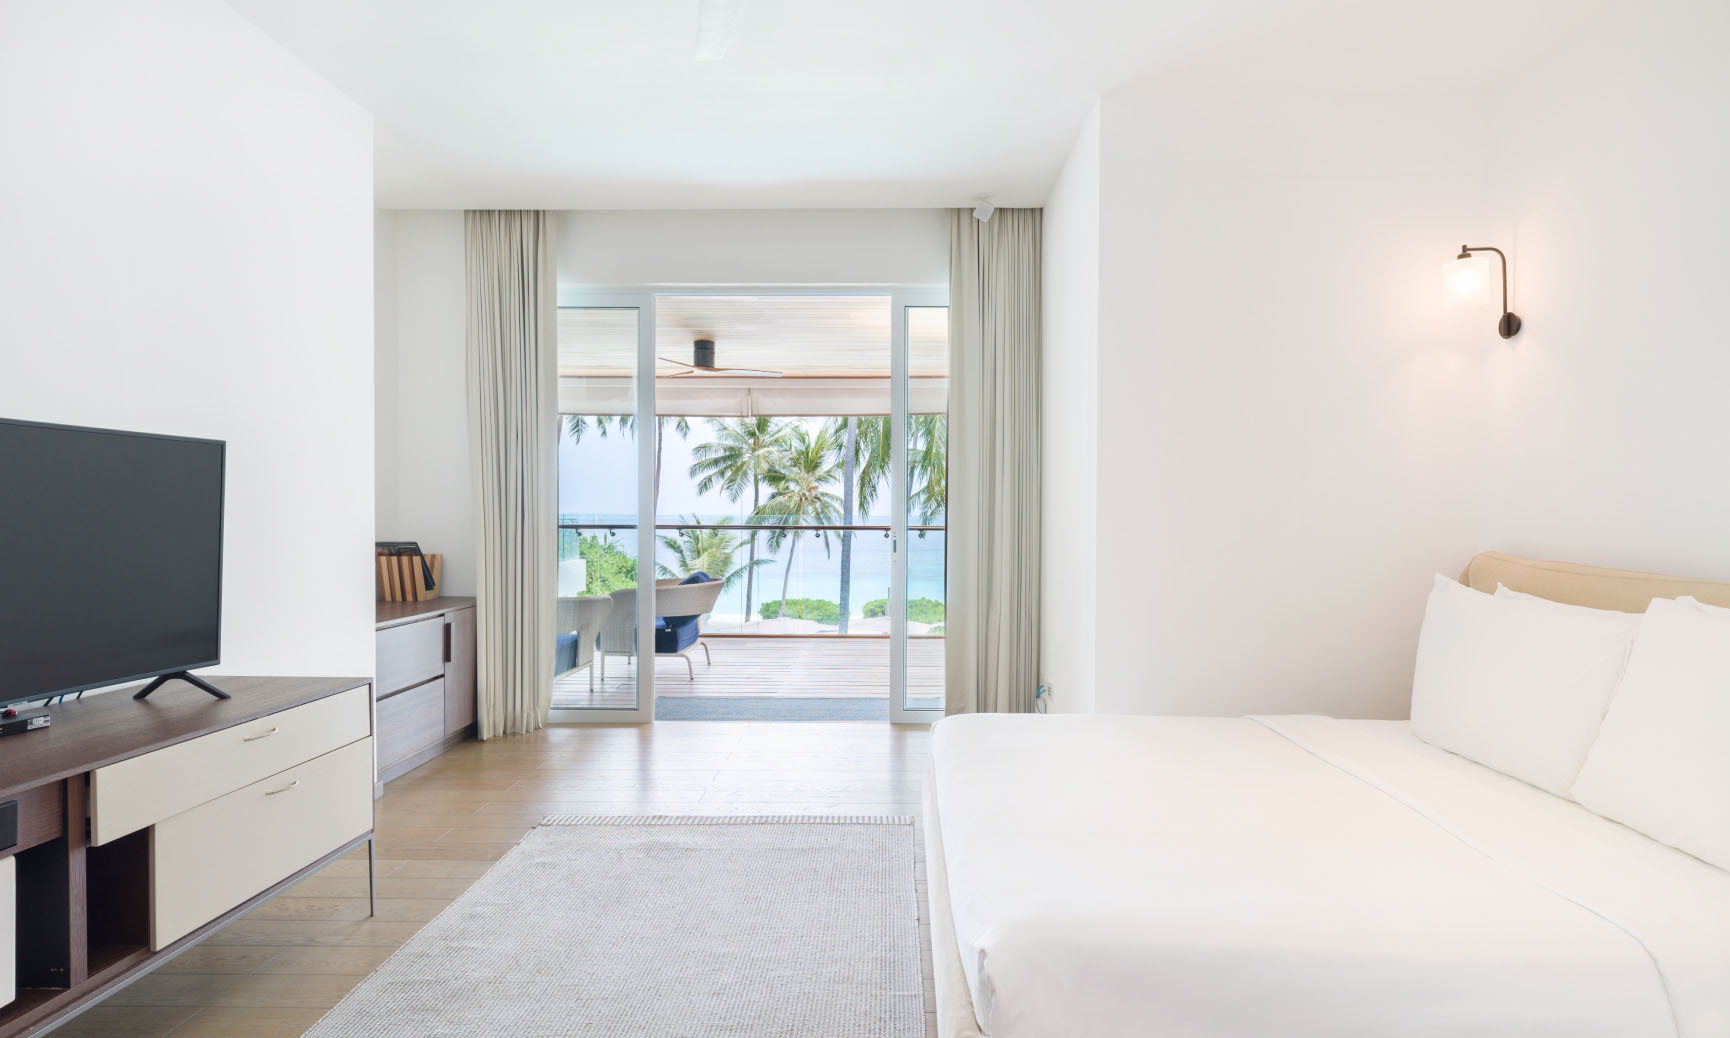 A suite with a king size bed, ensuite bathroom, and private balcony at our Luxury Maldives Family Accommodations.